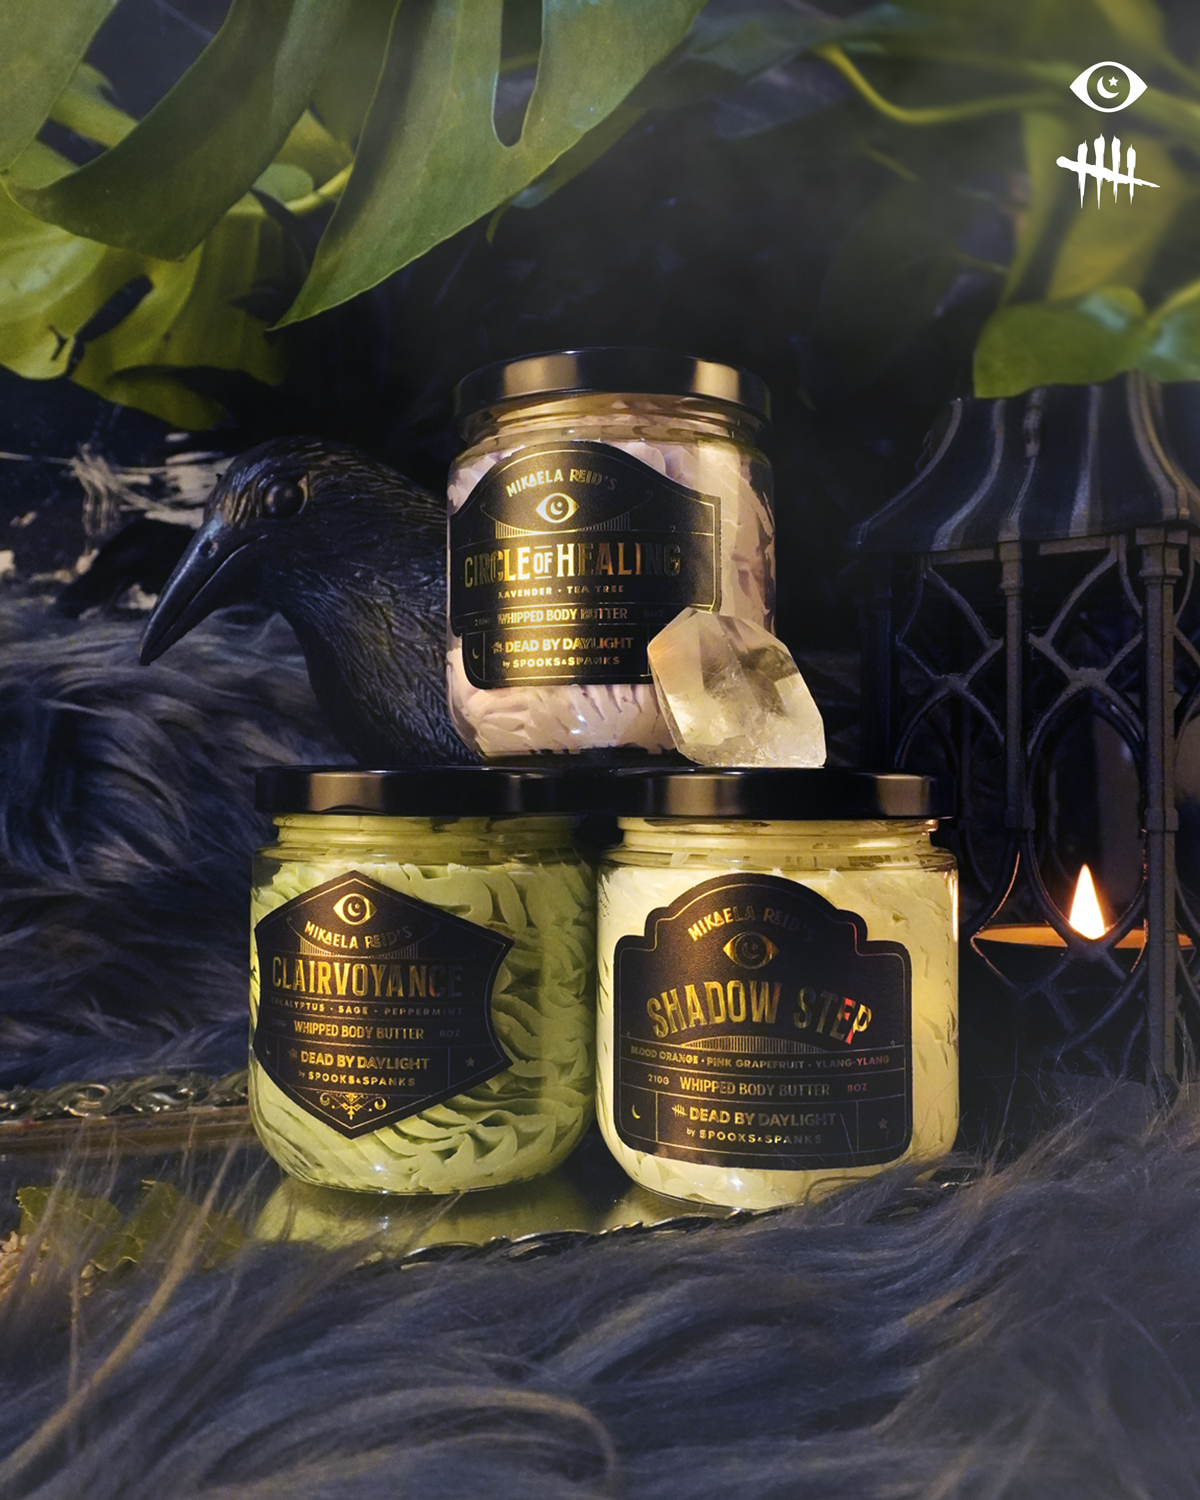 Clairvoyance • Official Dead by Daylight (DBD) Body Butter